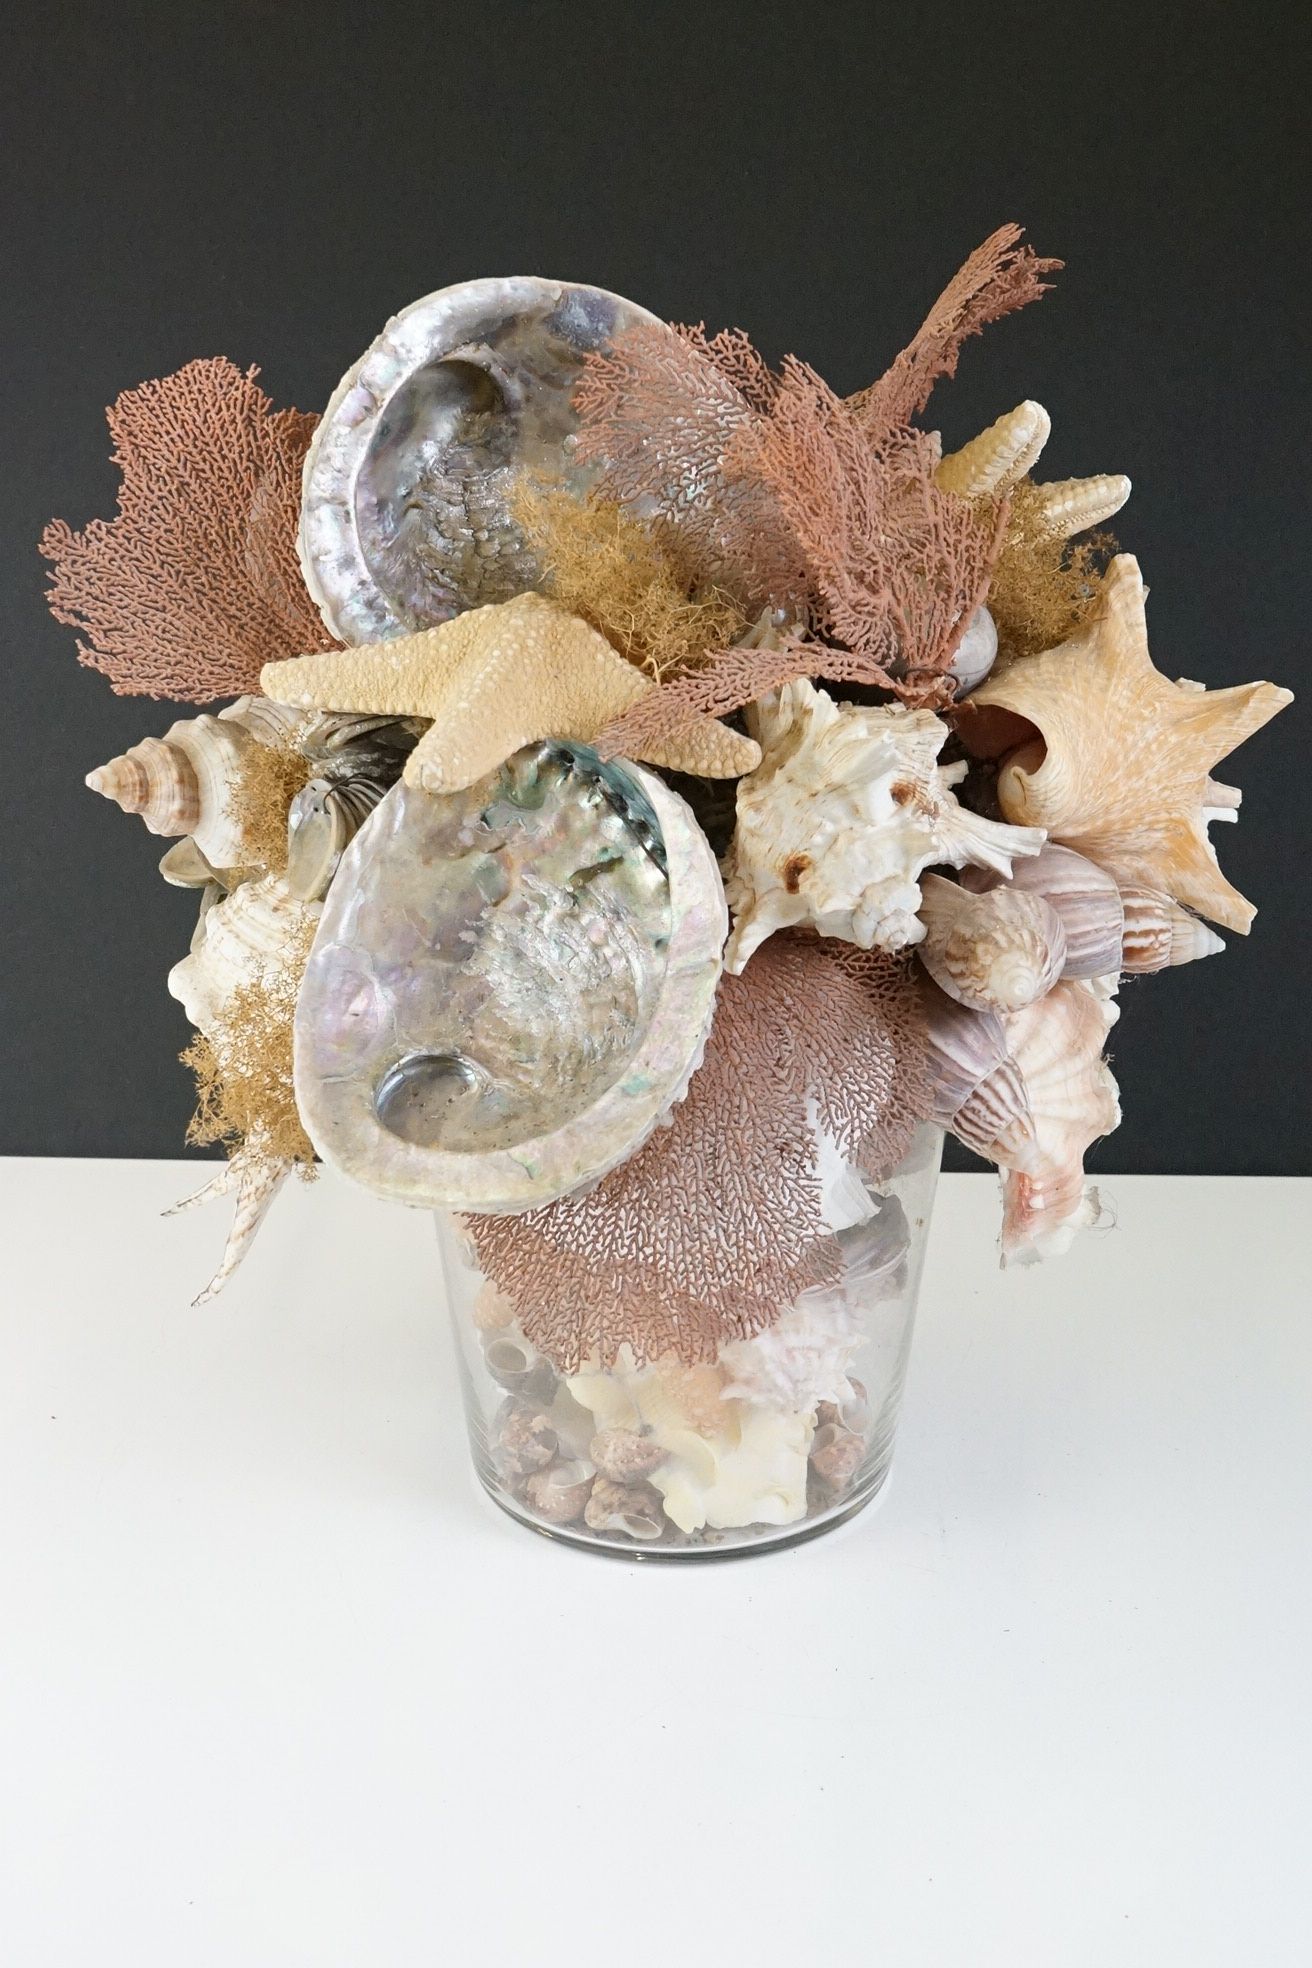 Table centrepiece presentation of sea shells to include conch shells, starfish, seaweed, paua - Image 2 of 10